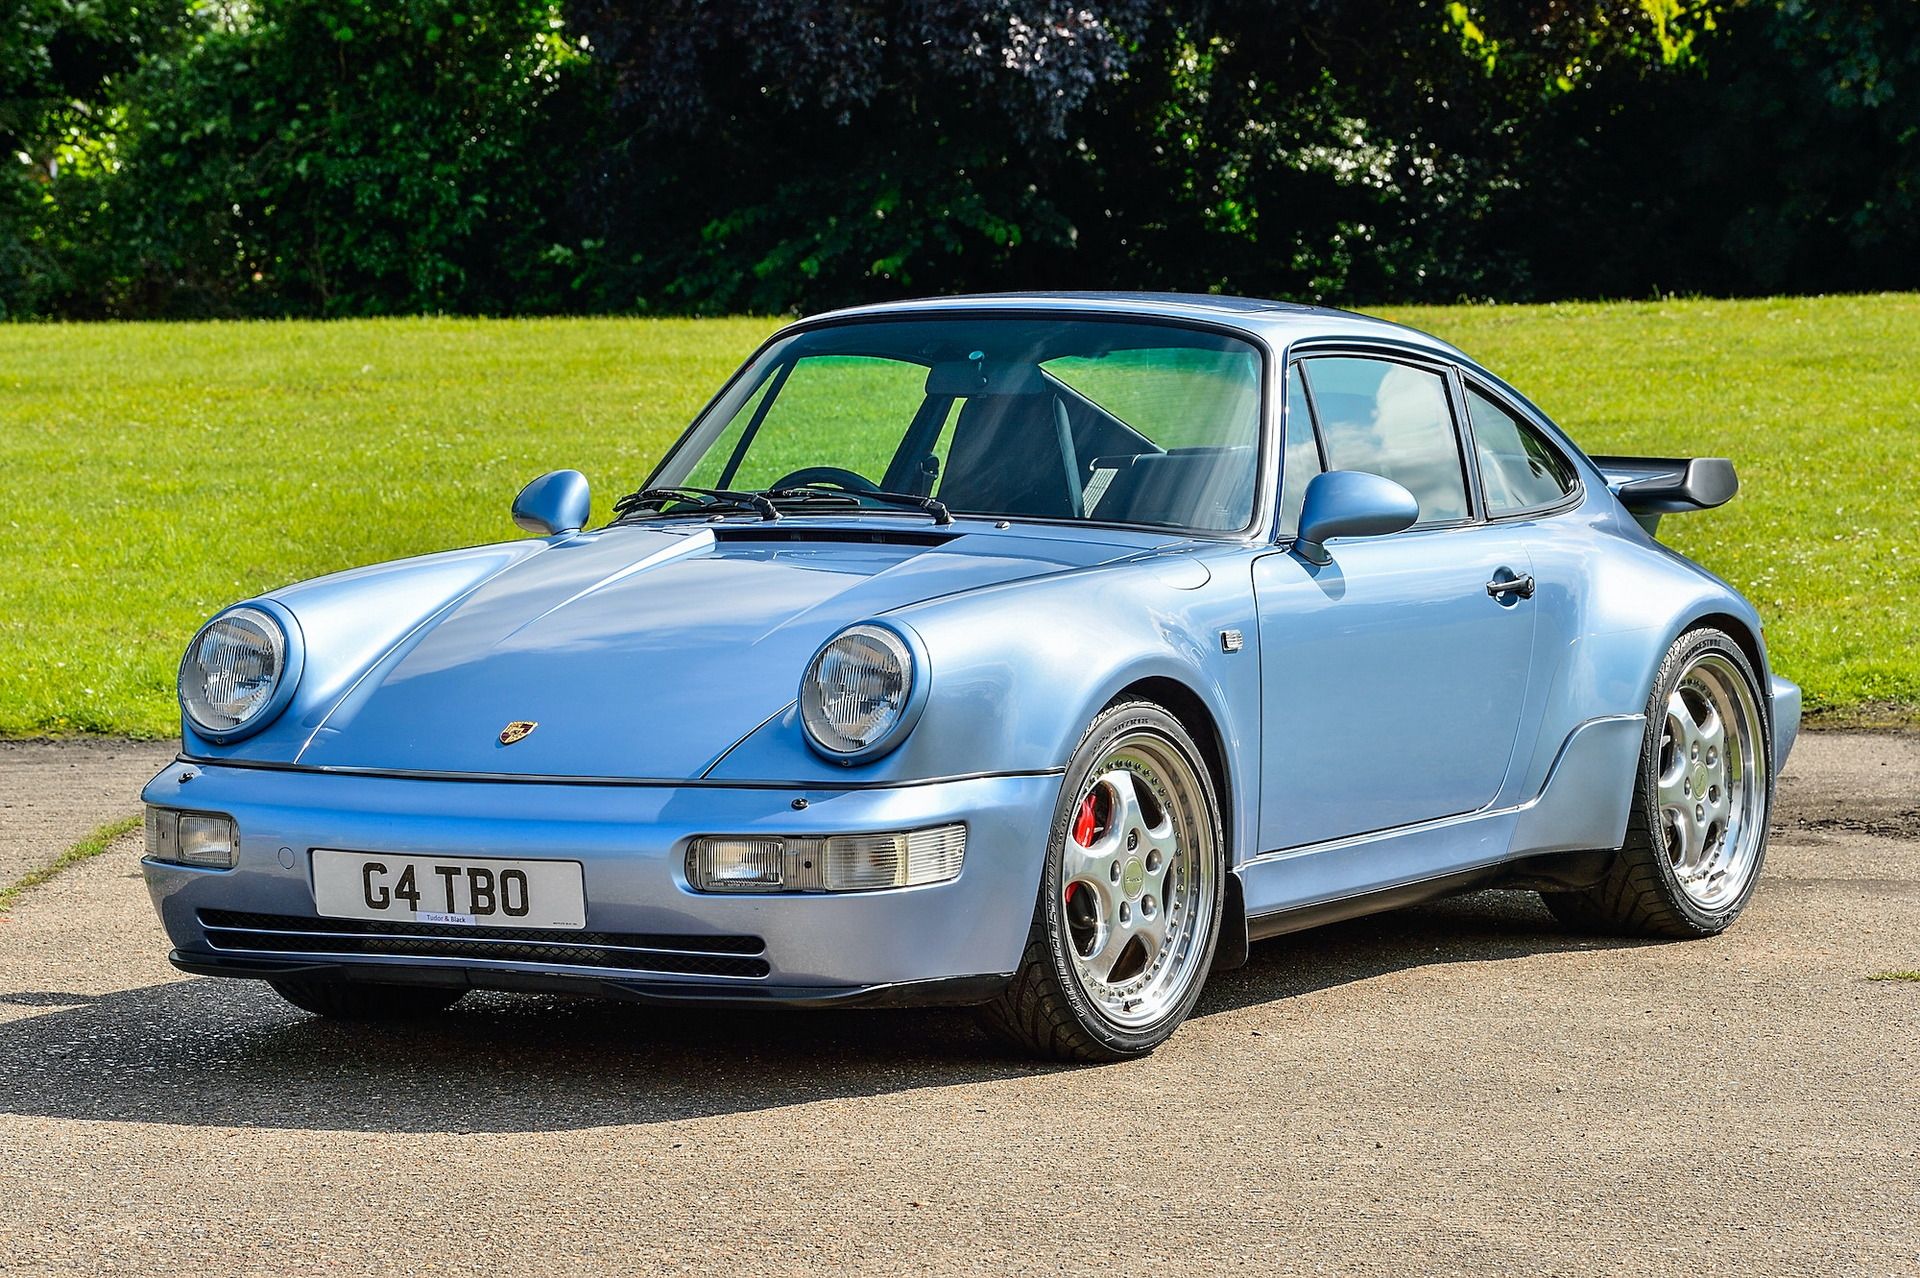 1994 Porsche 964: The iconic sports car built for all ages.